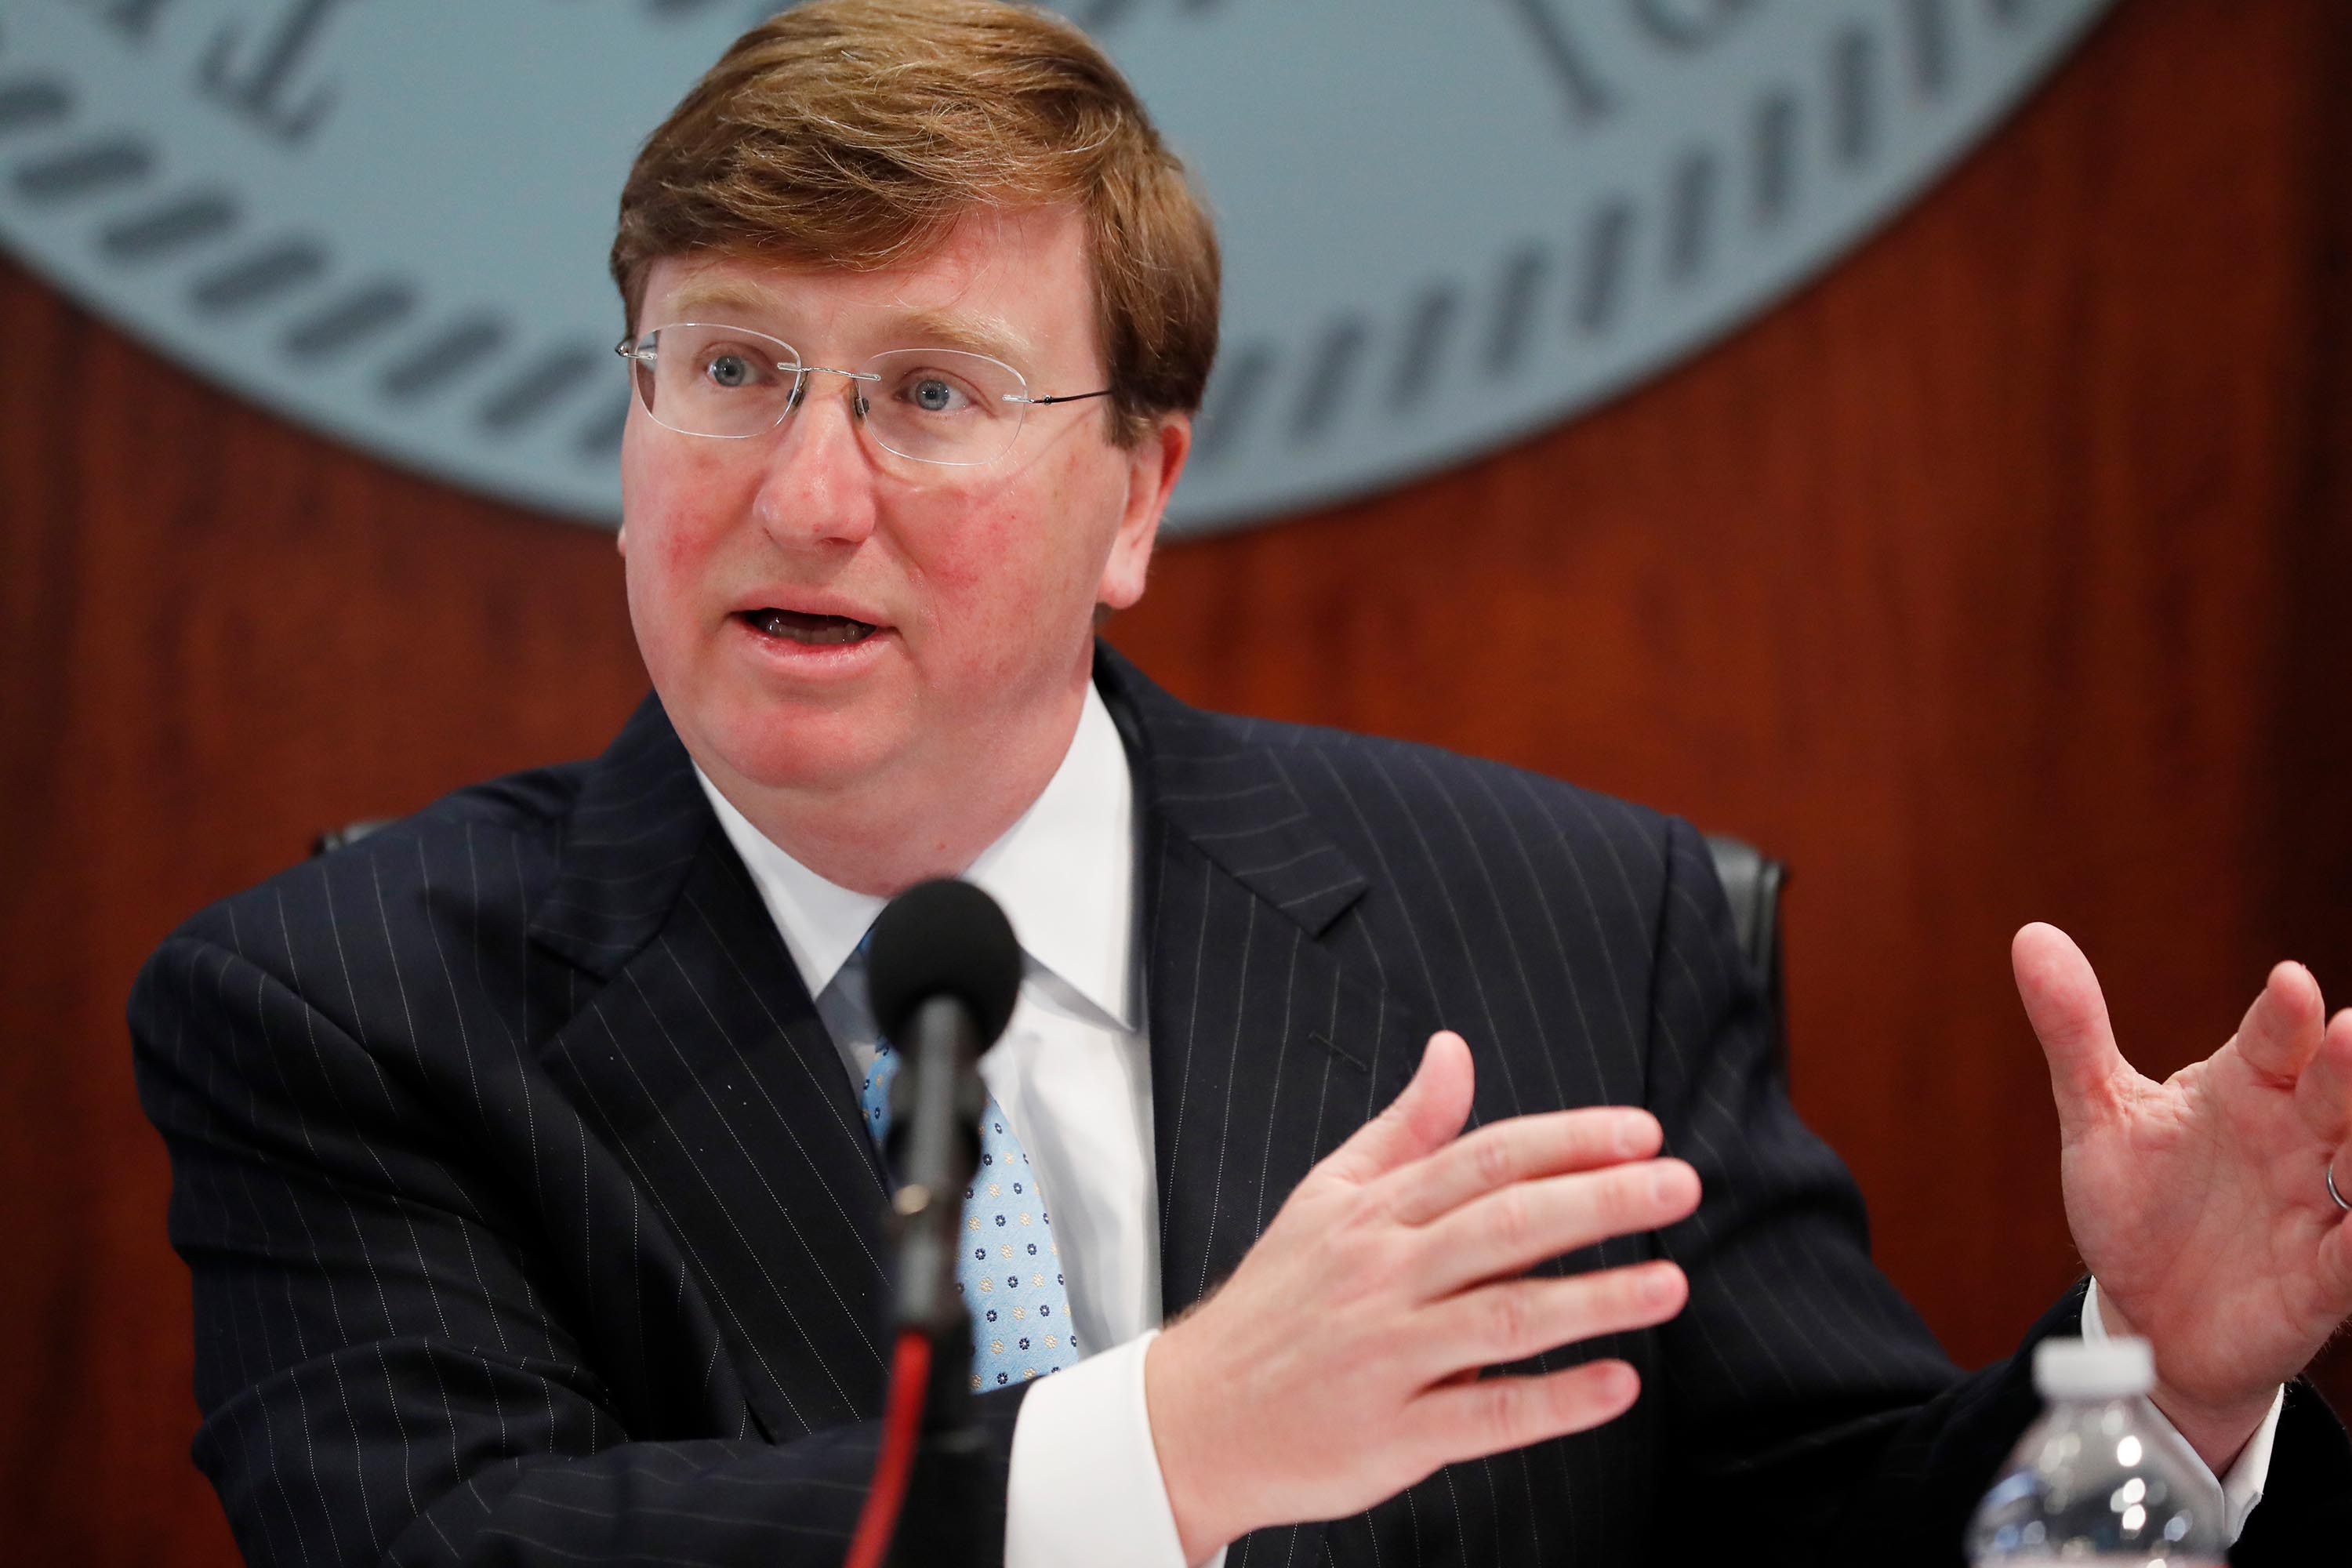 Mississippi Gov. Tate Reeves discusses how the state is responding to COVID-19 during a news conference in Jackson, Mississippi, Monday, April 6.